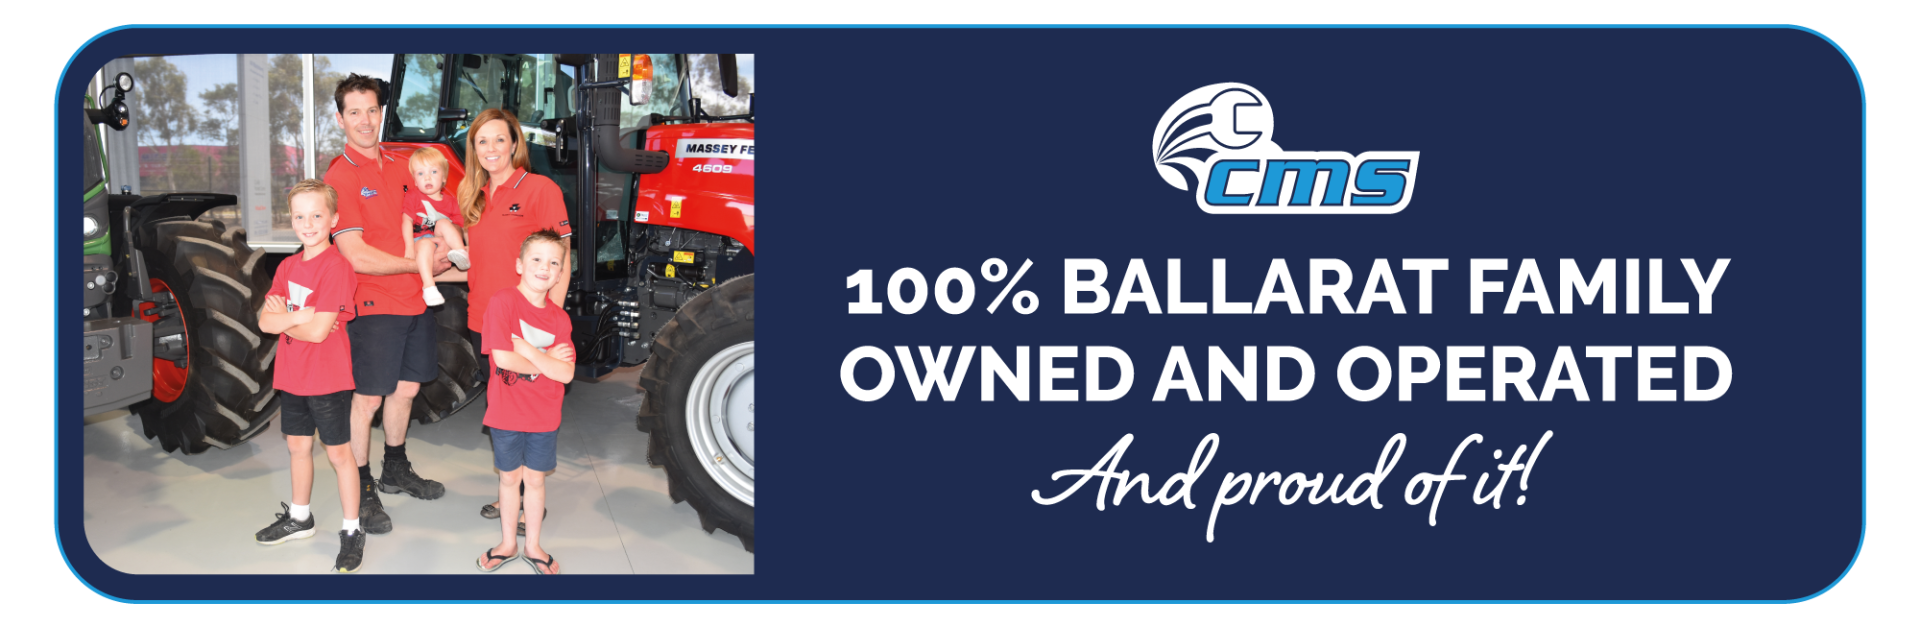 Central Machinery Services 100% Ballarat family owned and operated.